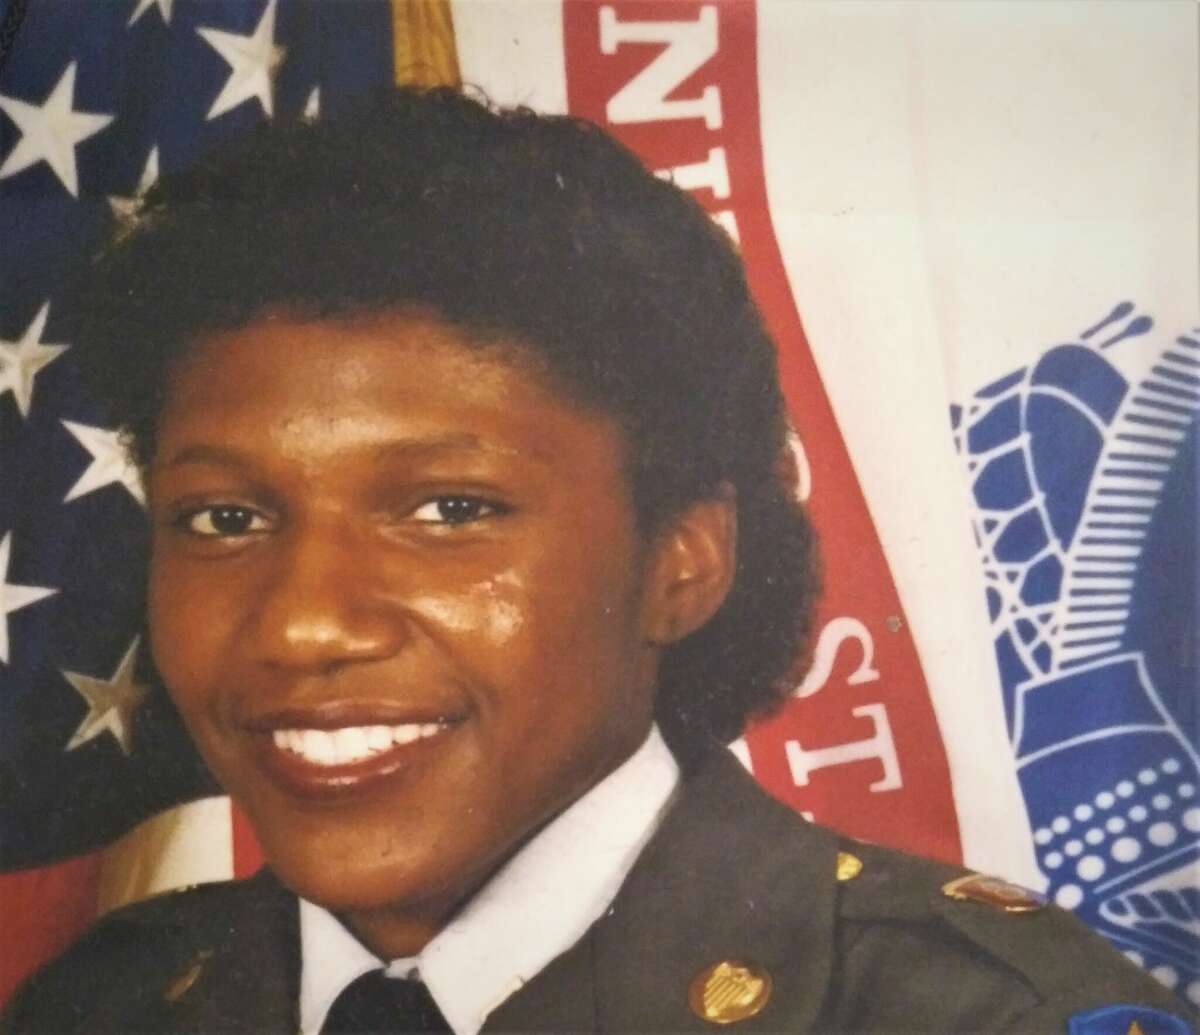 Bridgitte Prince joined the U.S. Army 10 days after her high school gradation. 